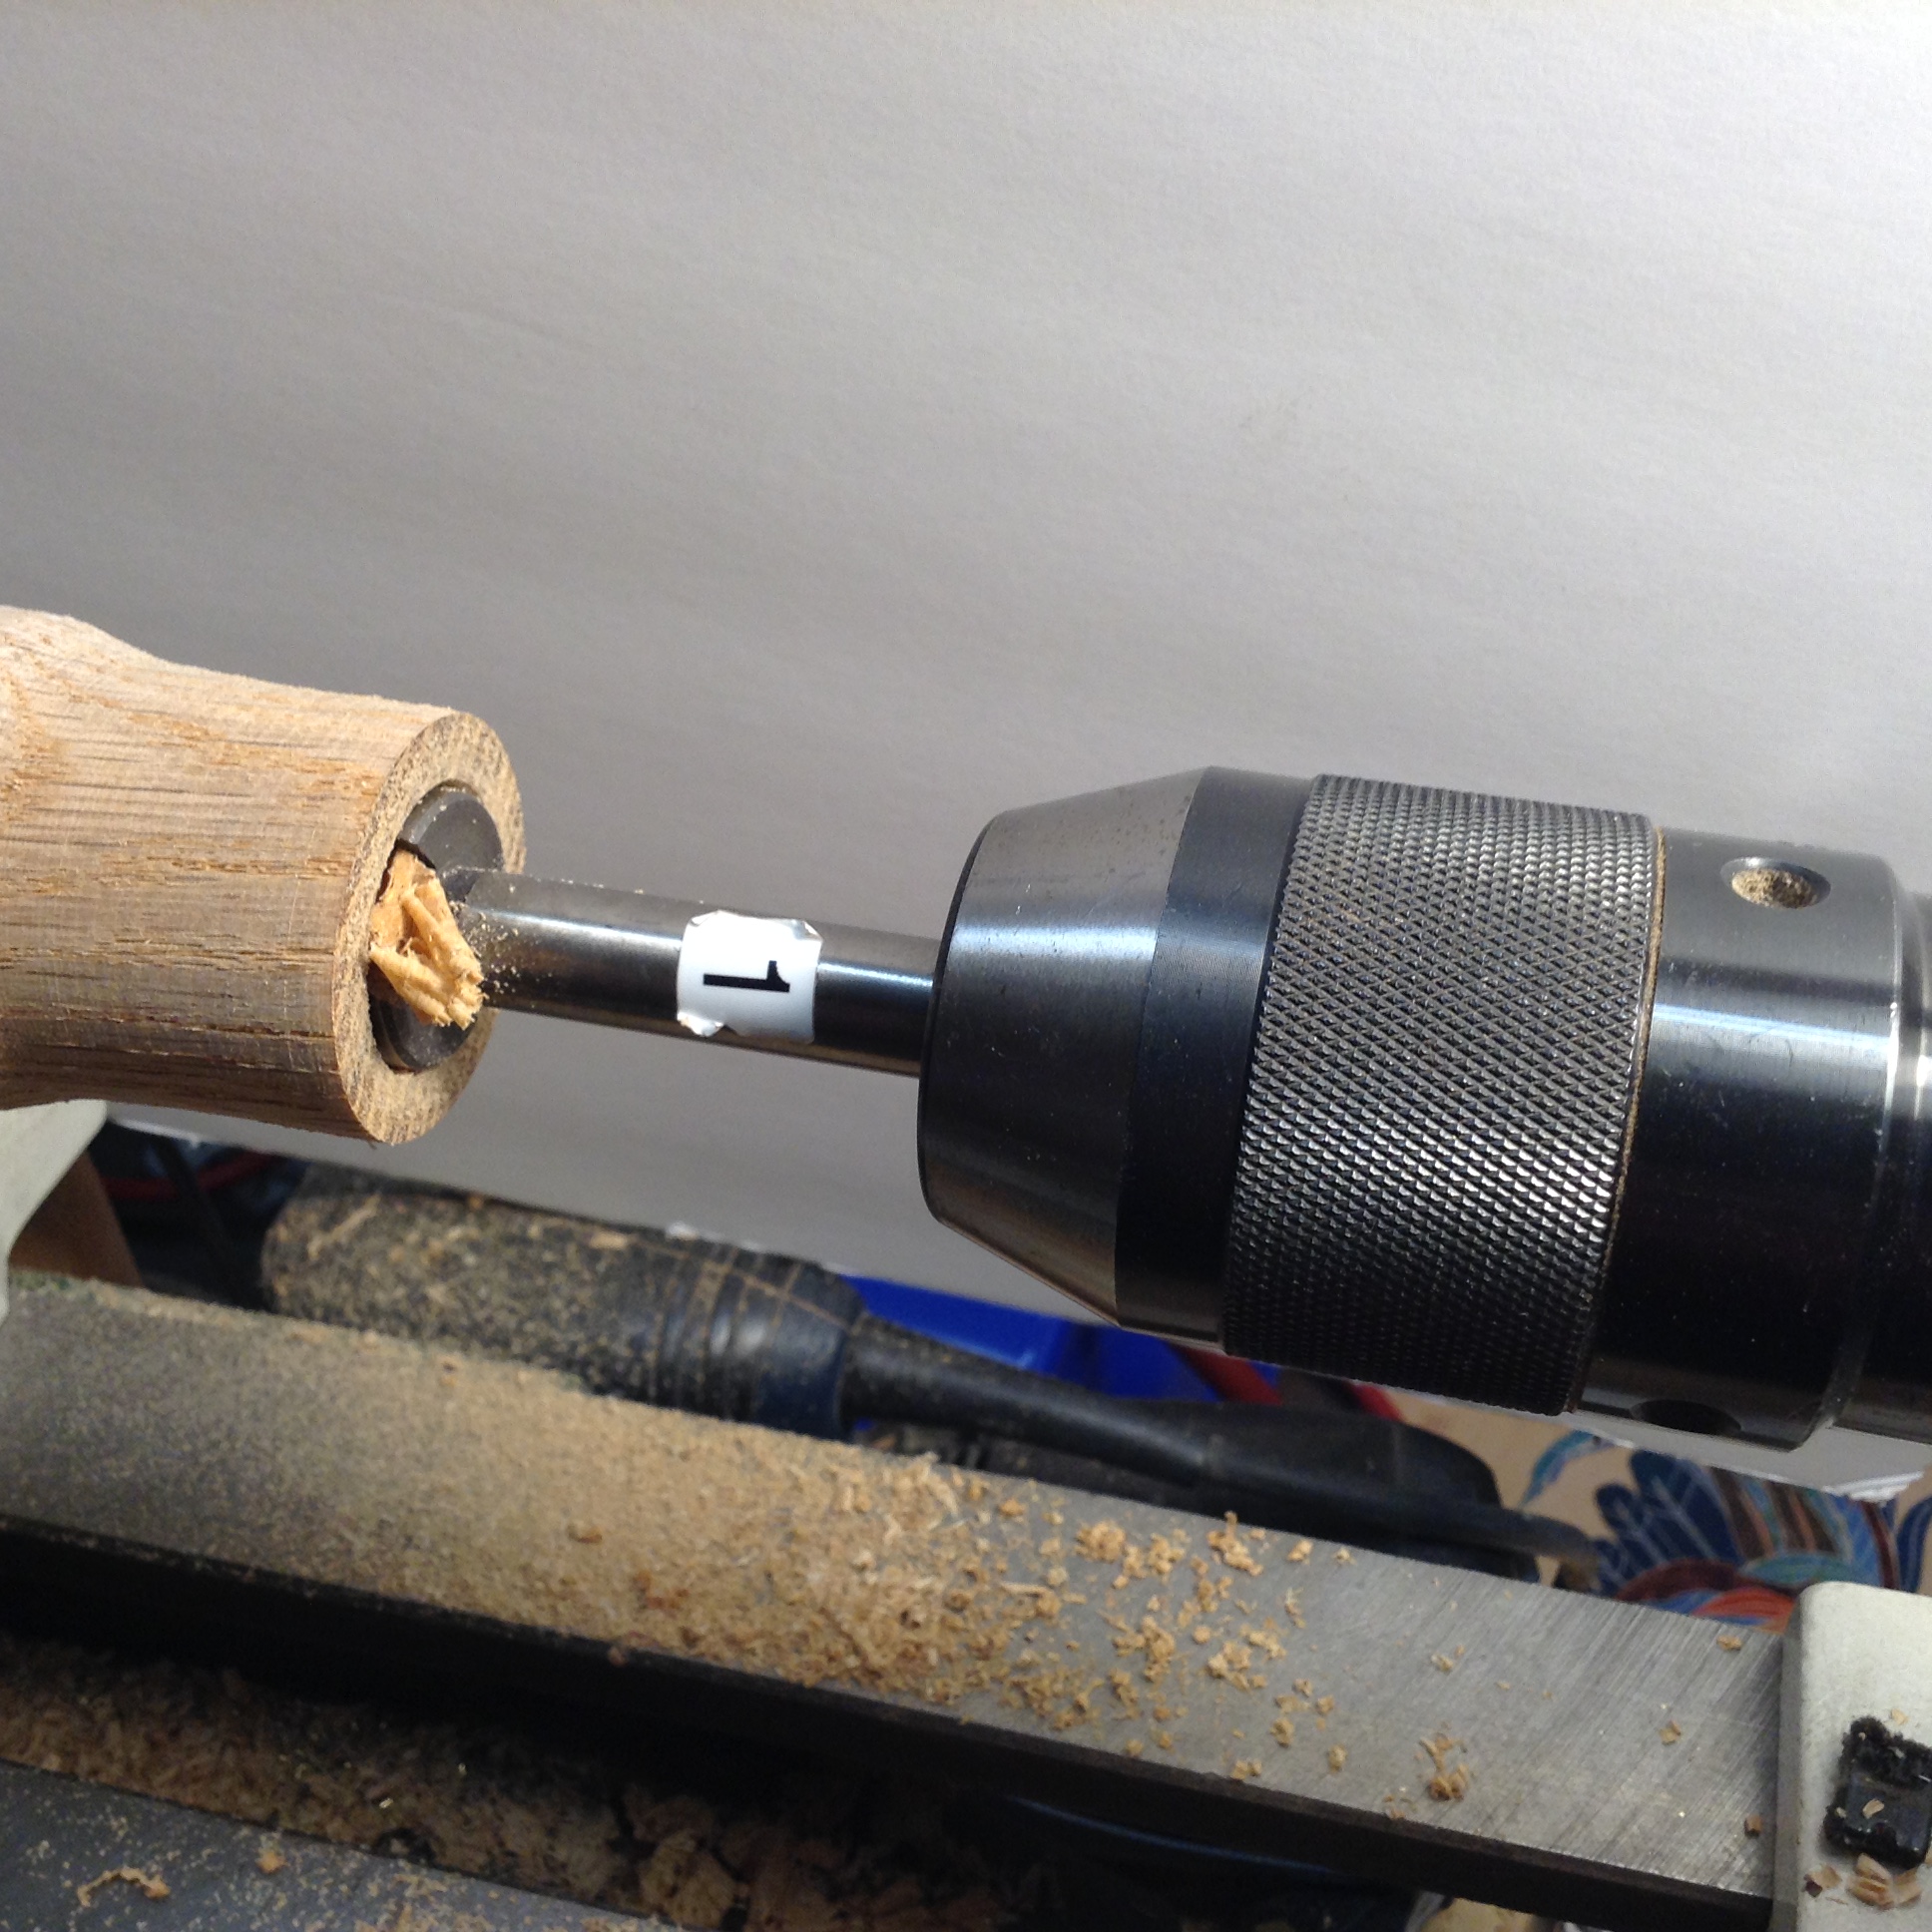 Yet another dumbbell screw Moxon vise Page 3 NC Woodworker